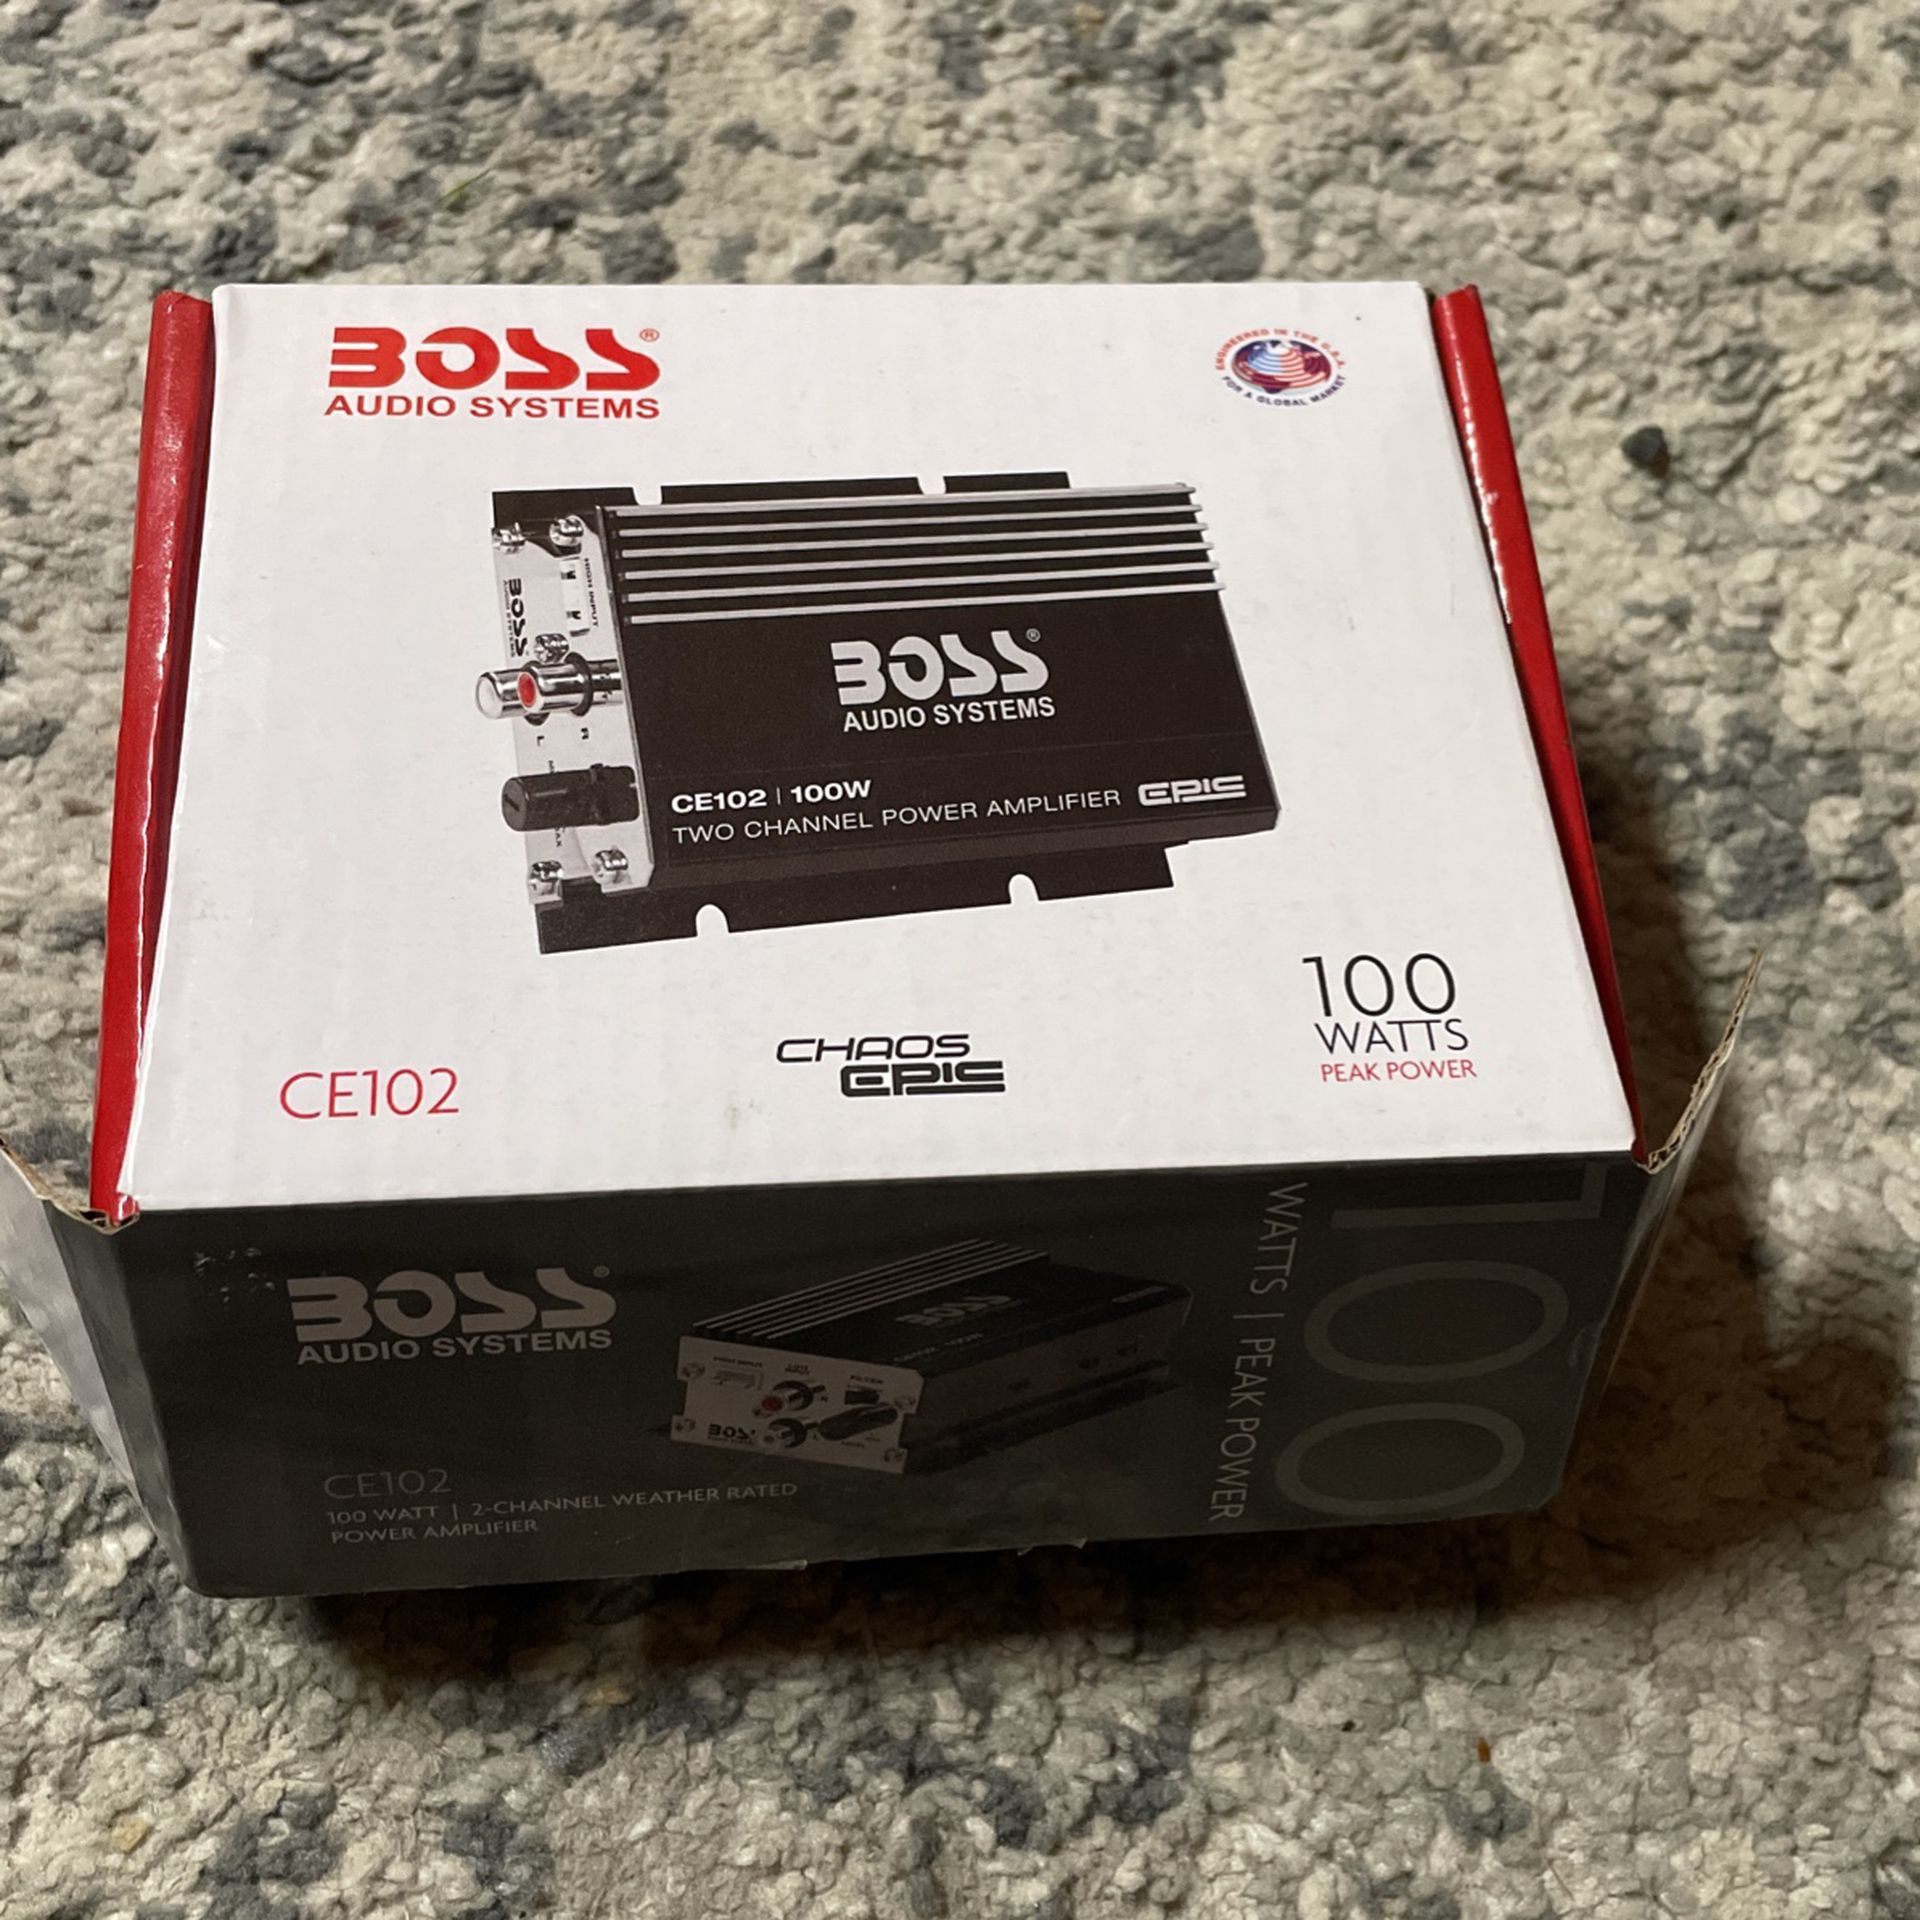 3.7 out of 5 stars BOSS Audio Systems CE102 2 Channel Car Amplifier - 100 Watts, Full Range, Class A/B, IC (Integrated Circuit)